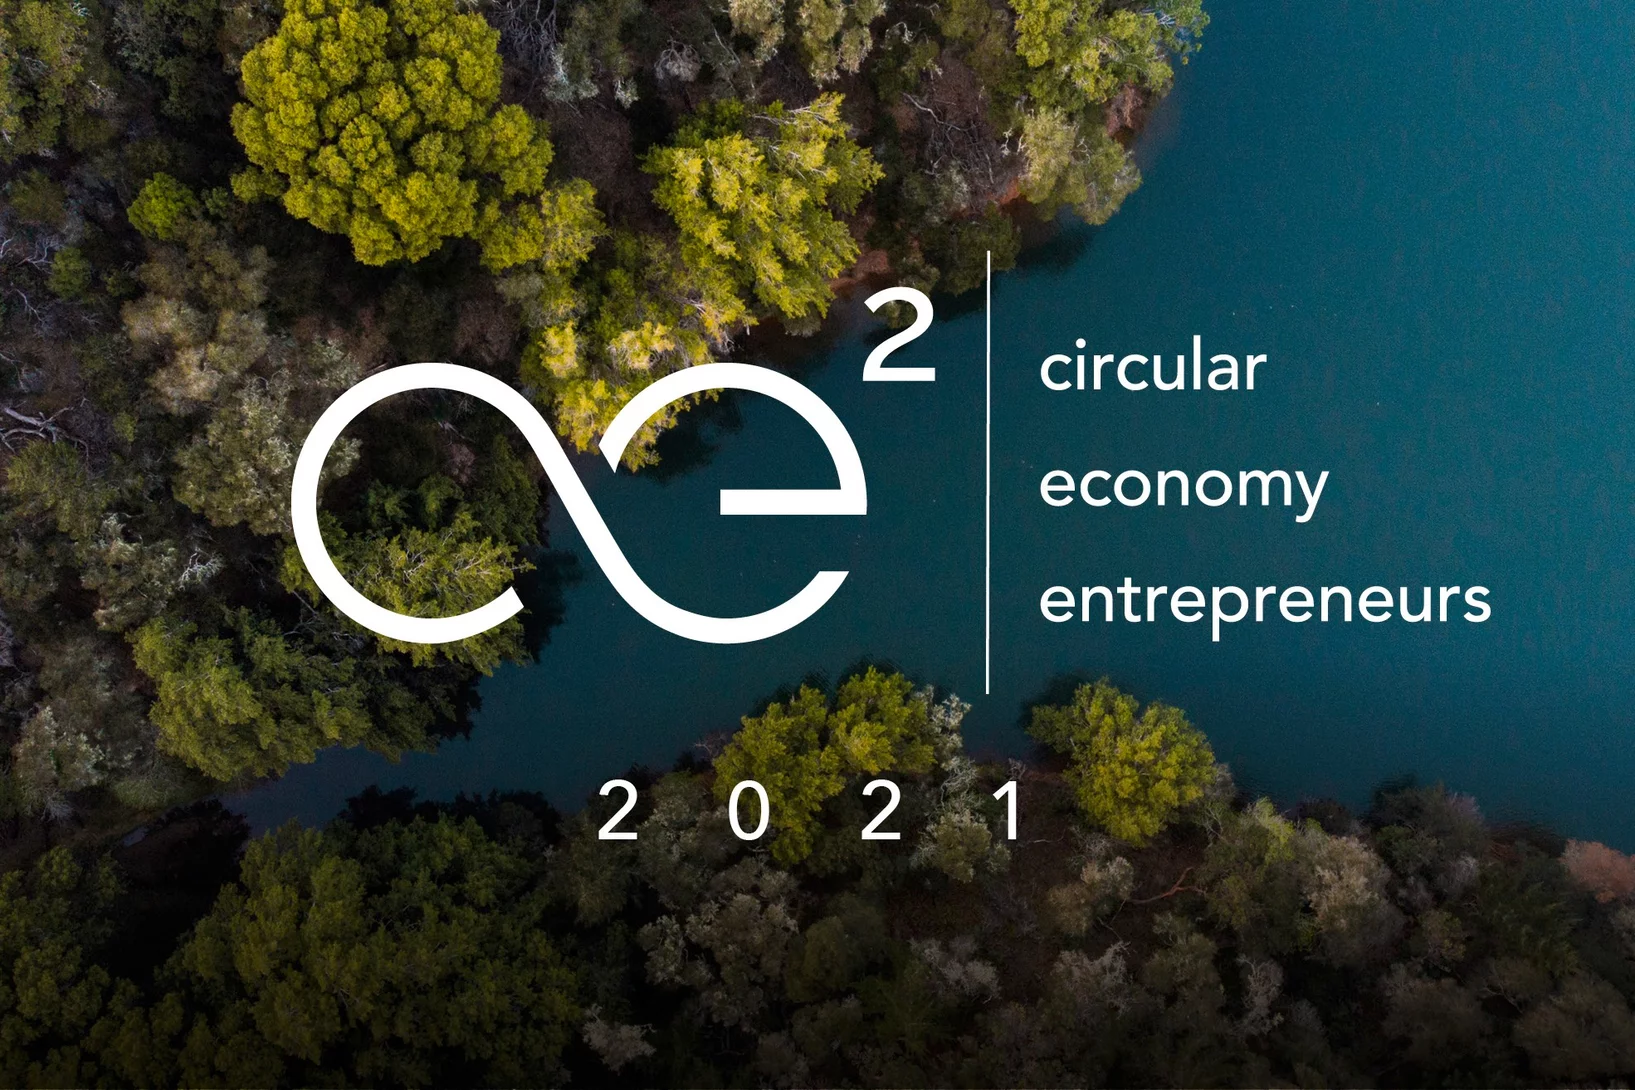 The CE2 conference will take place on 22 September 2021 in the Kursaal in Bern. 